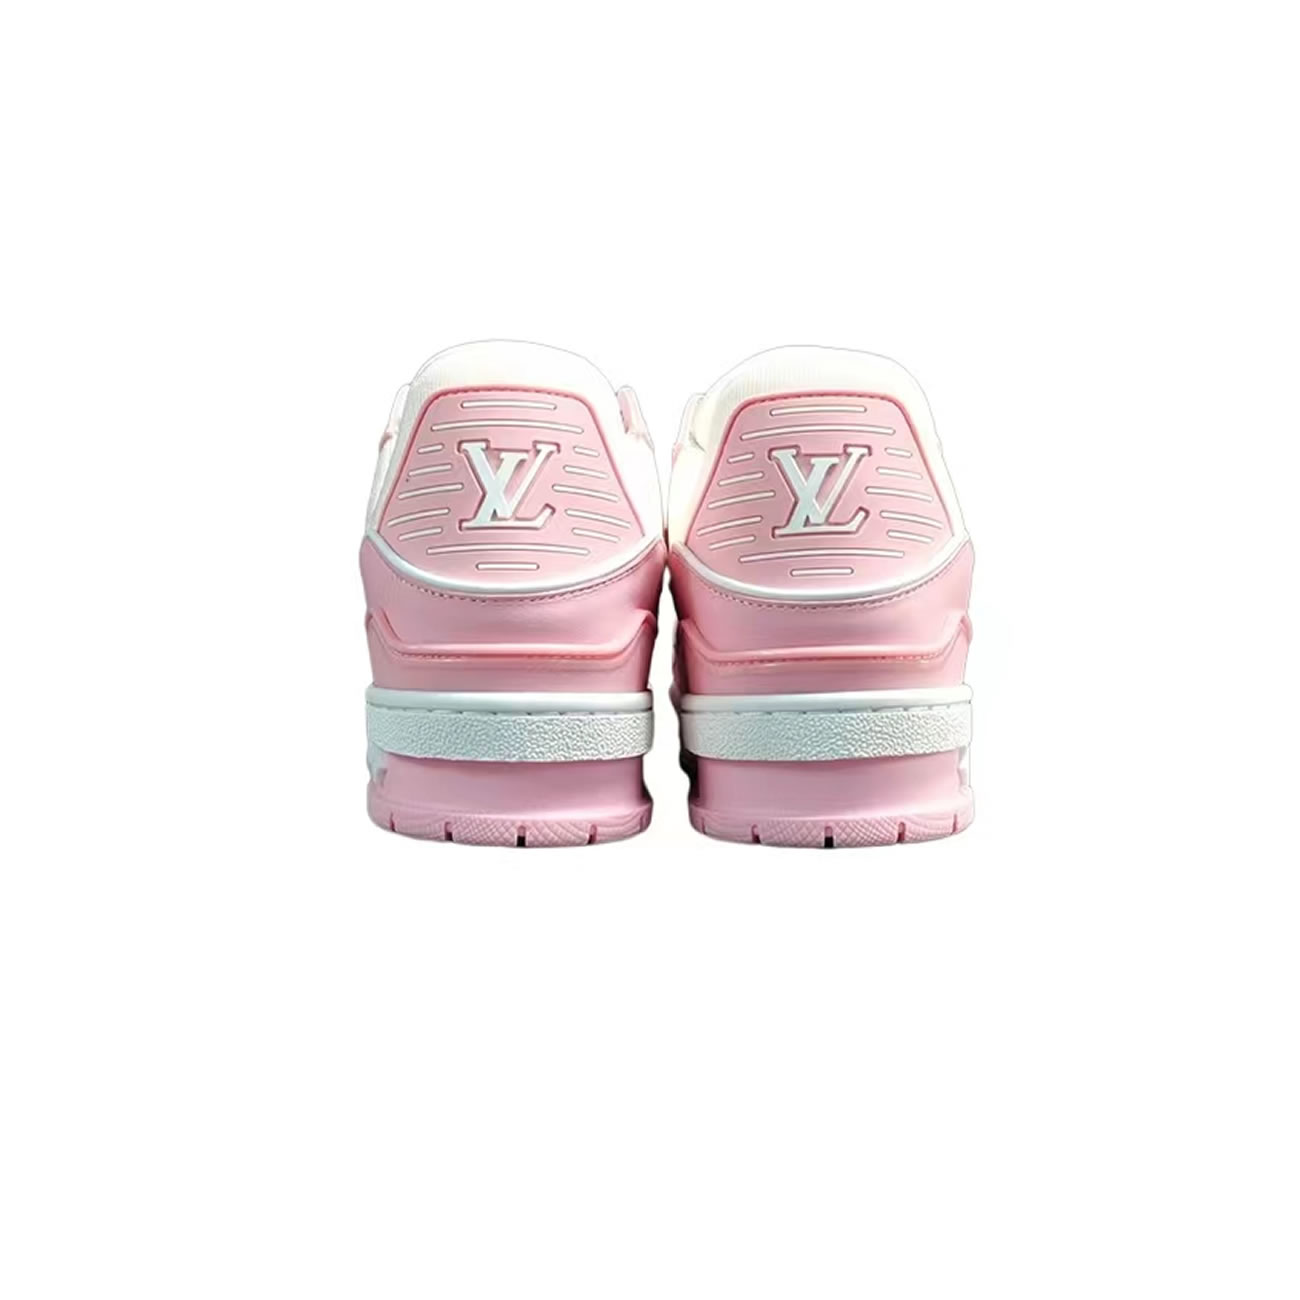 Lv Trainer Vuitton Sneaker Pink 1aa6w3 (2) - newkick.org